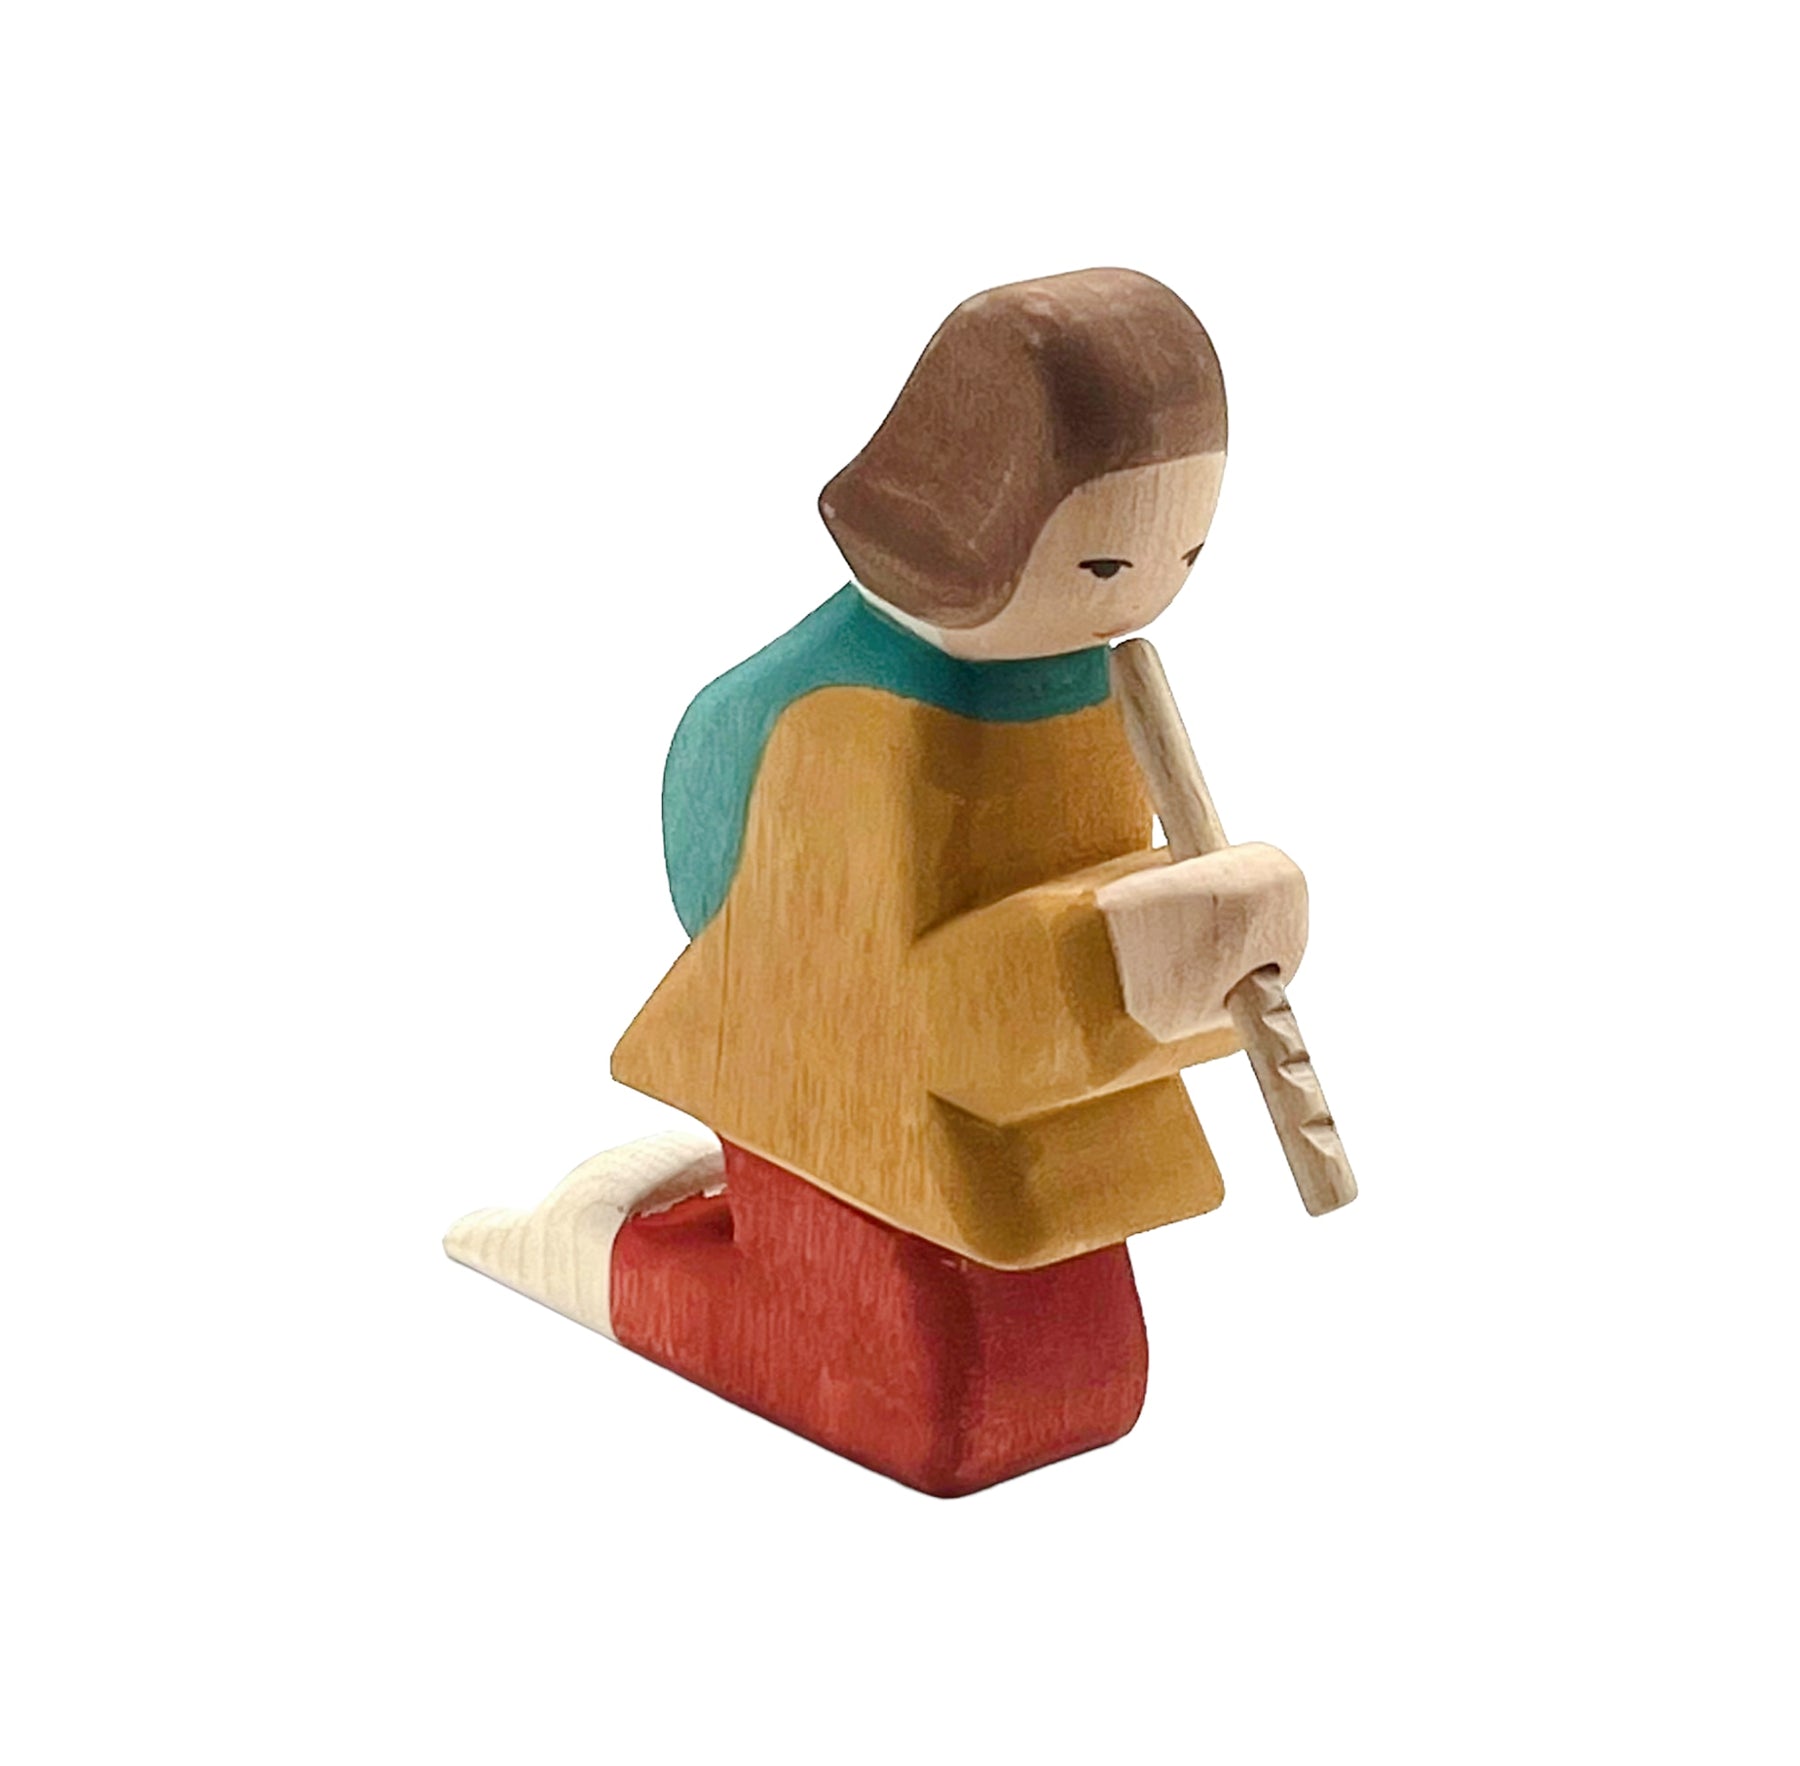 Handcrafted Open Ended Wooden Toy Figure Family - Shepherd Playing Flute